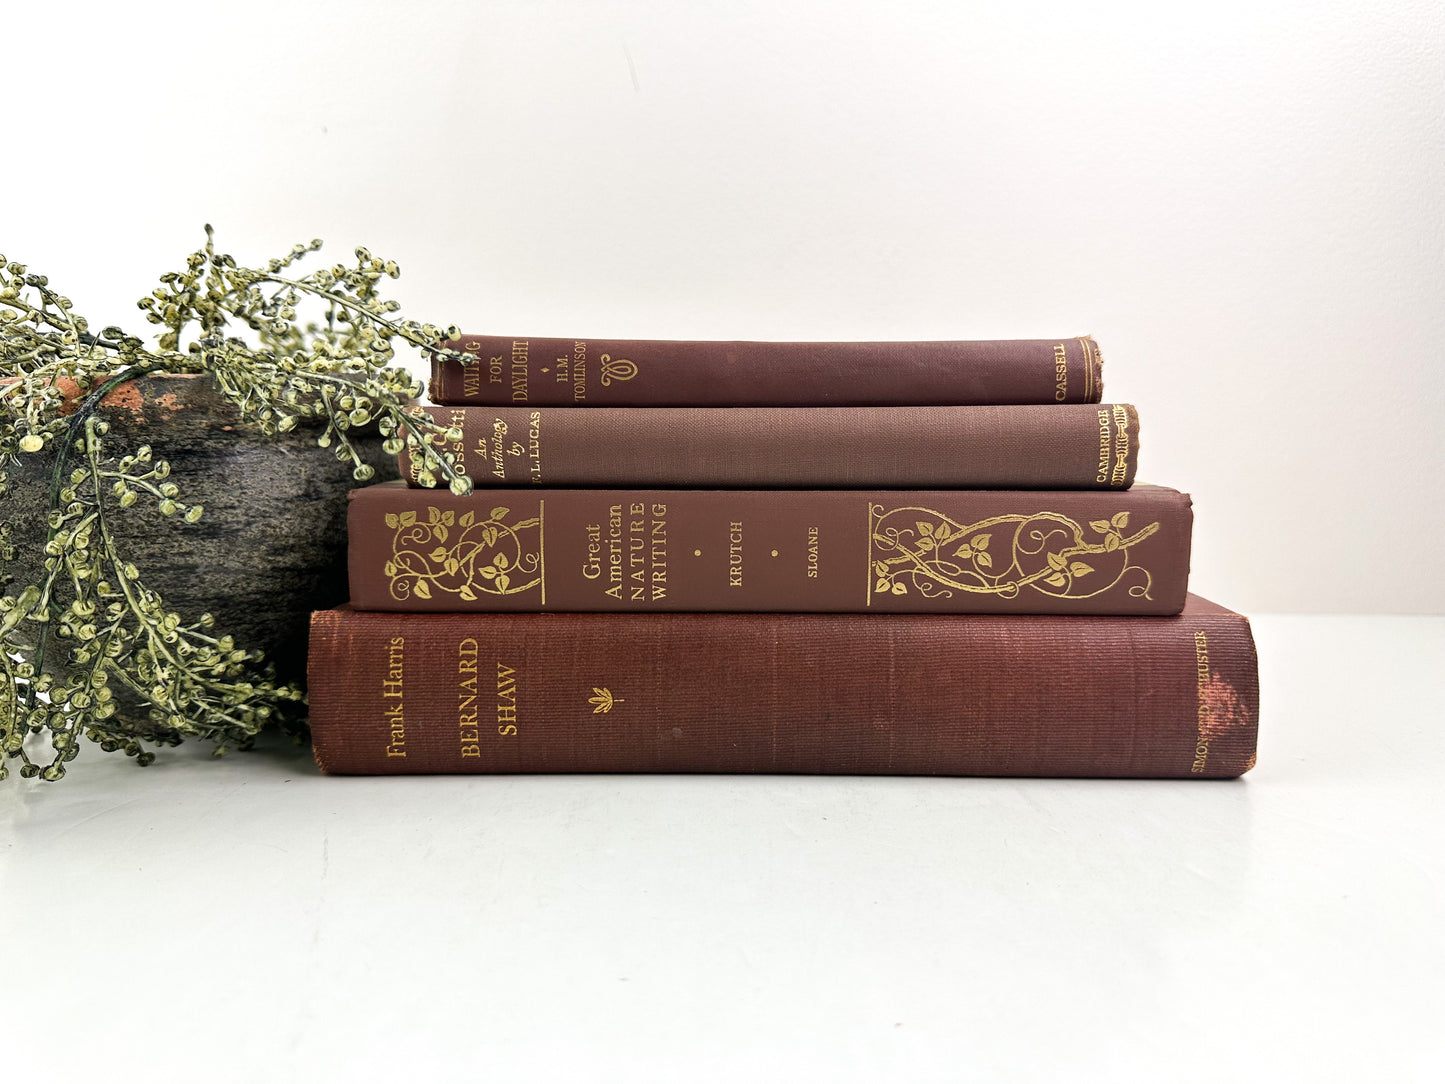 Classic Red Books for Decor